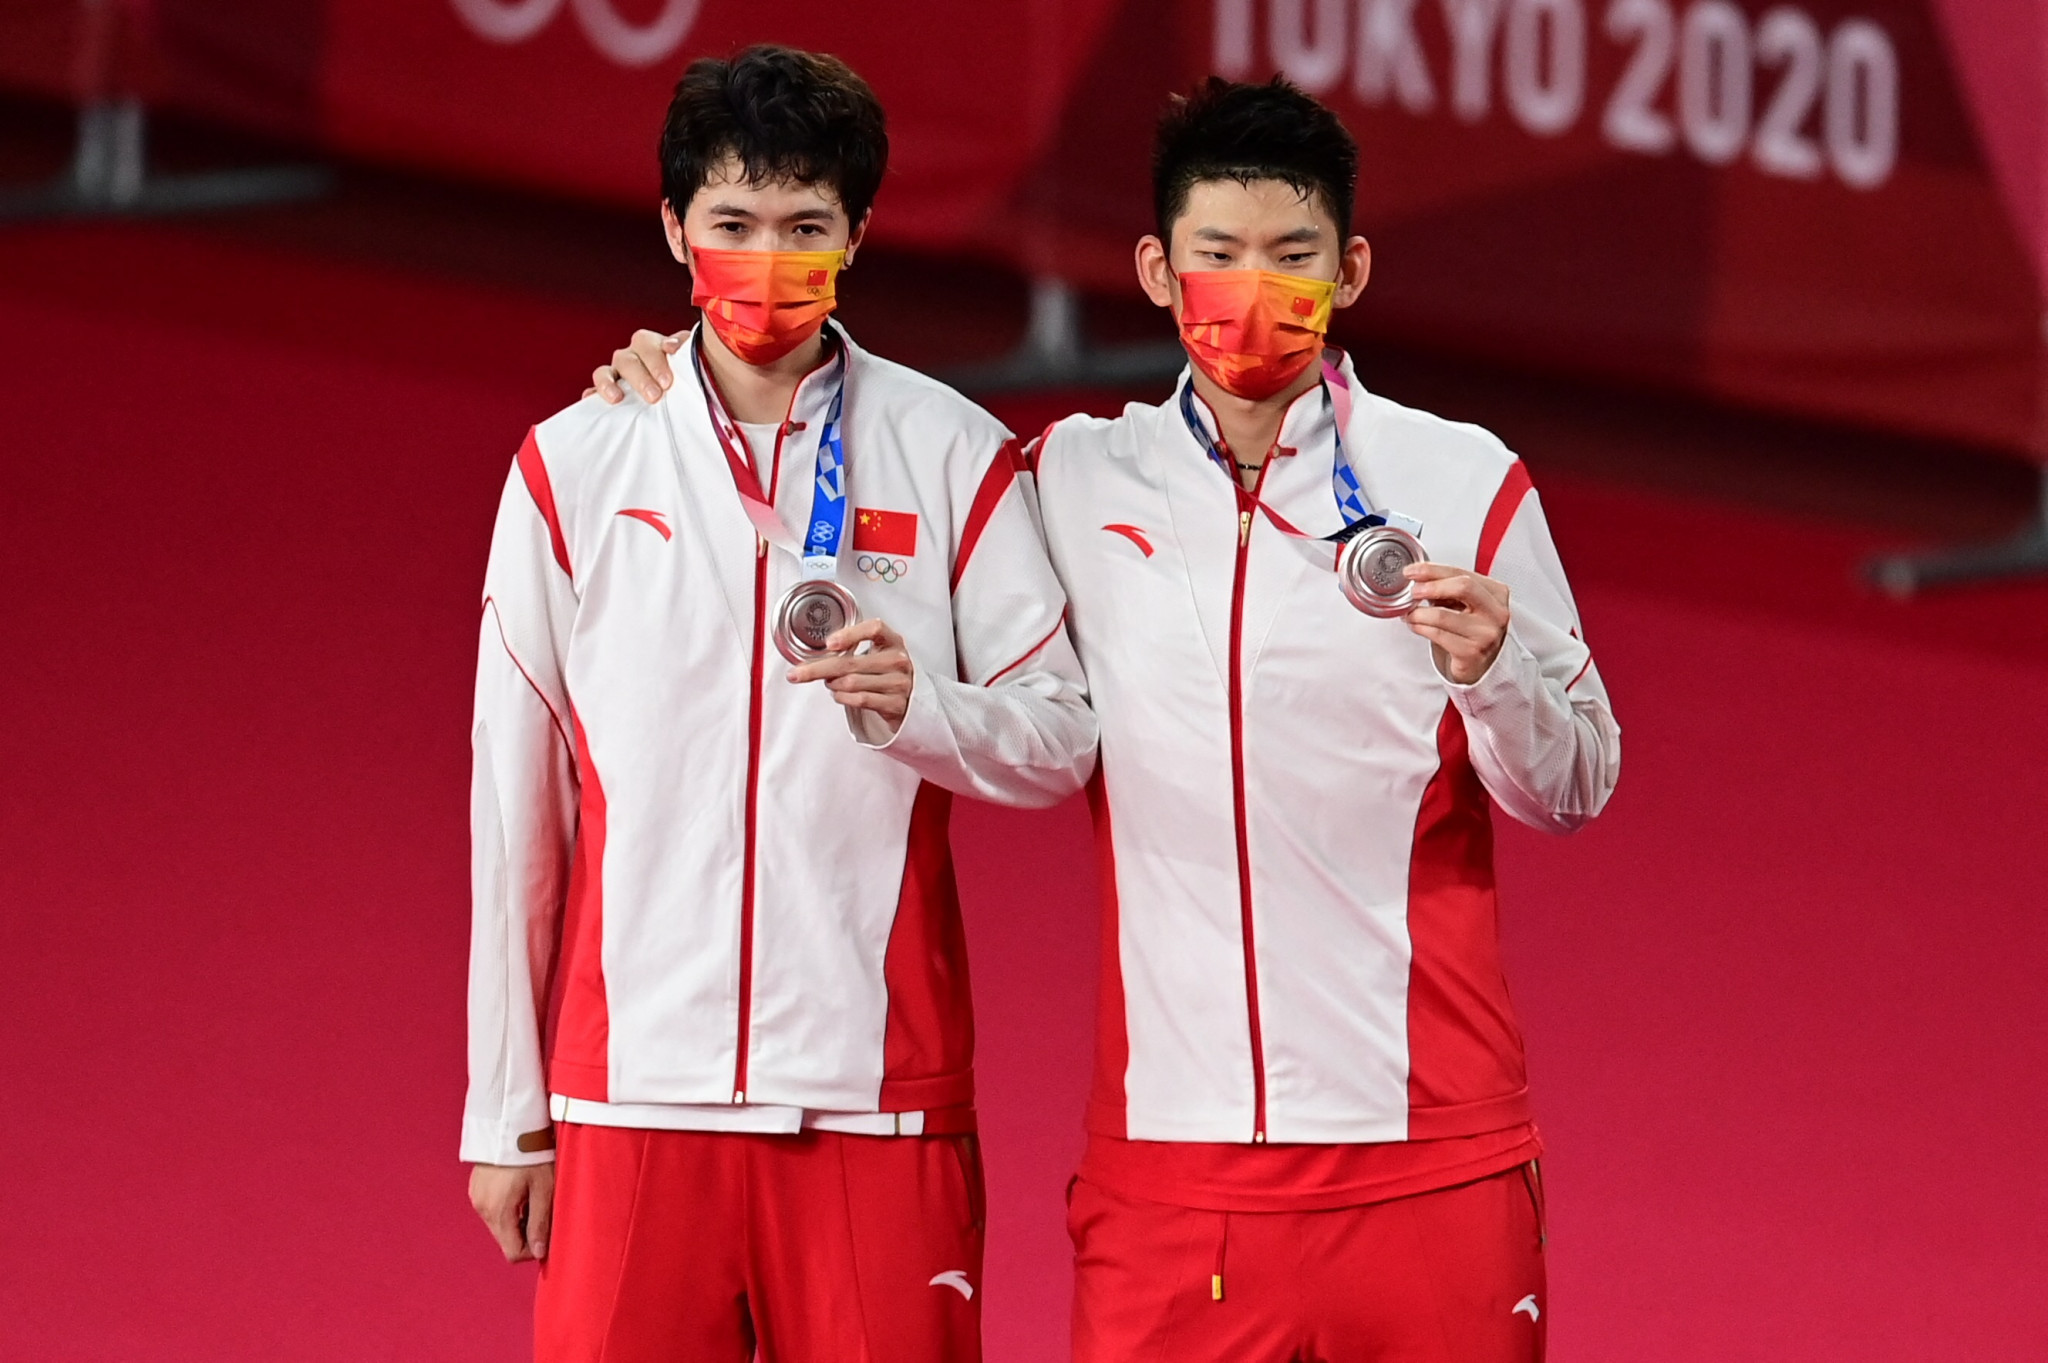 Olympic badminton doubles medallists receive suspended bans in 